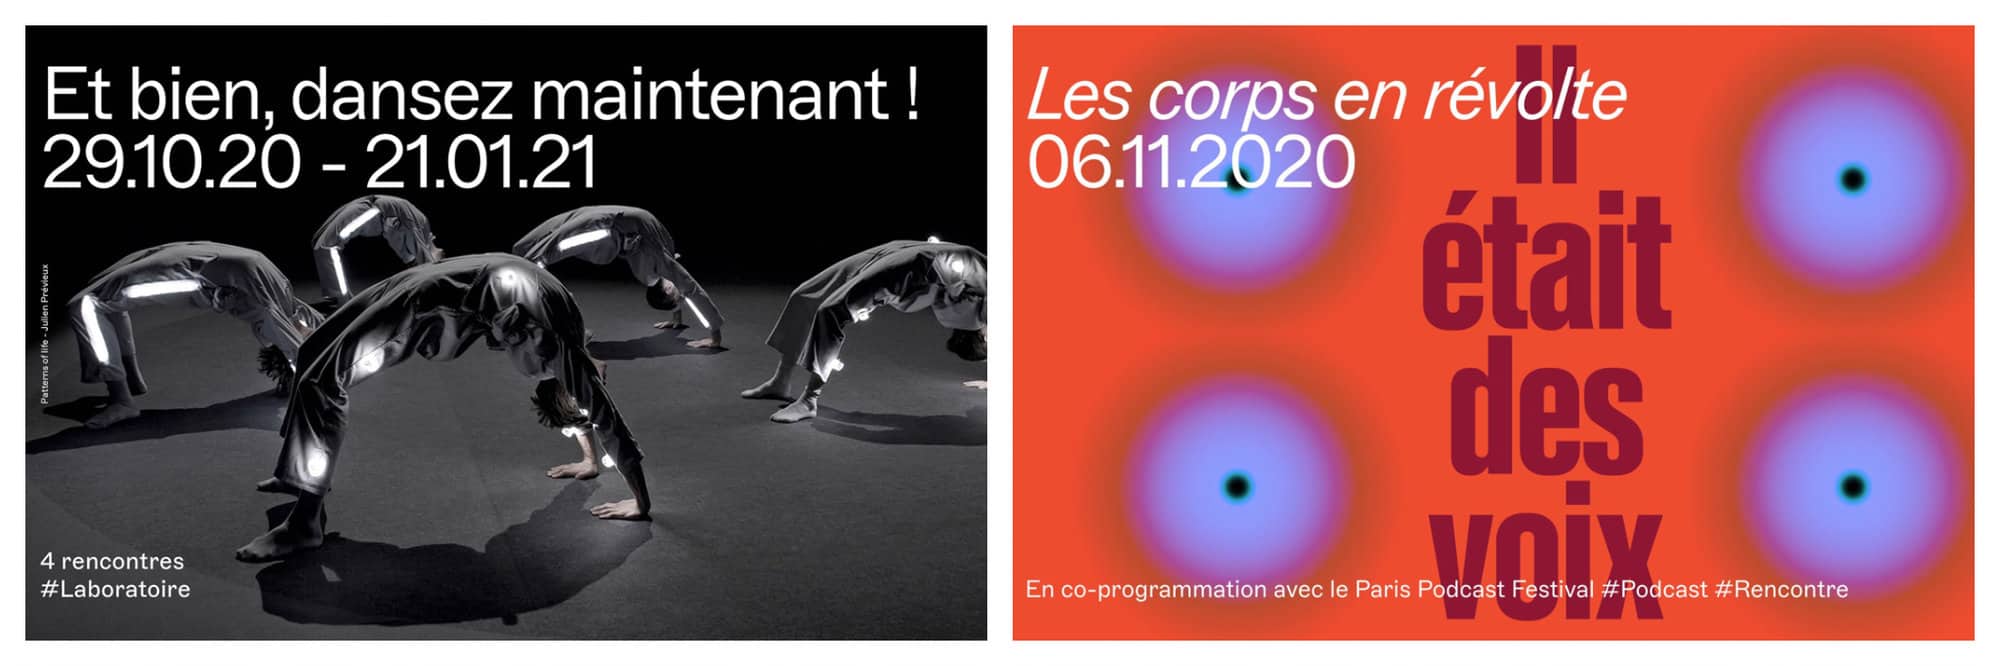 Left: advertisement with the words in French "eh bine, dansez maintenant!" There are 5 people dressed in black coveralls with white reflective material on them doing backbends. Right: advertisement with the words "les corps en révolte" written in French. The background is orange with 4 purple and blue spheres surrounding the words ""il était des voix" in French in the middle.